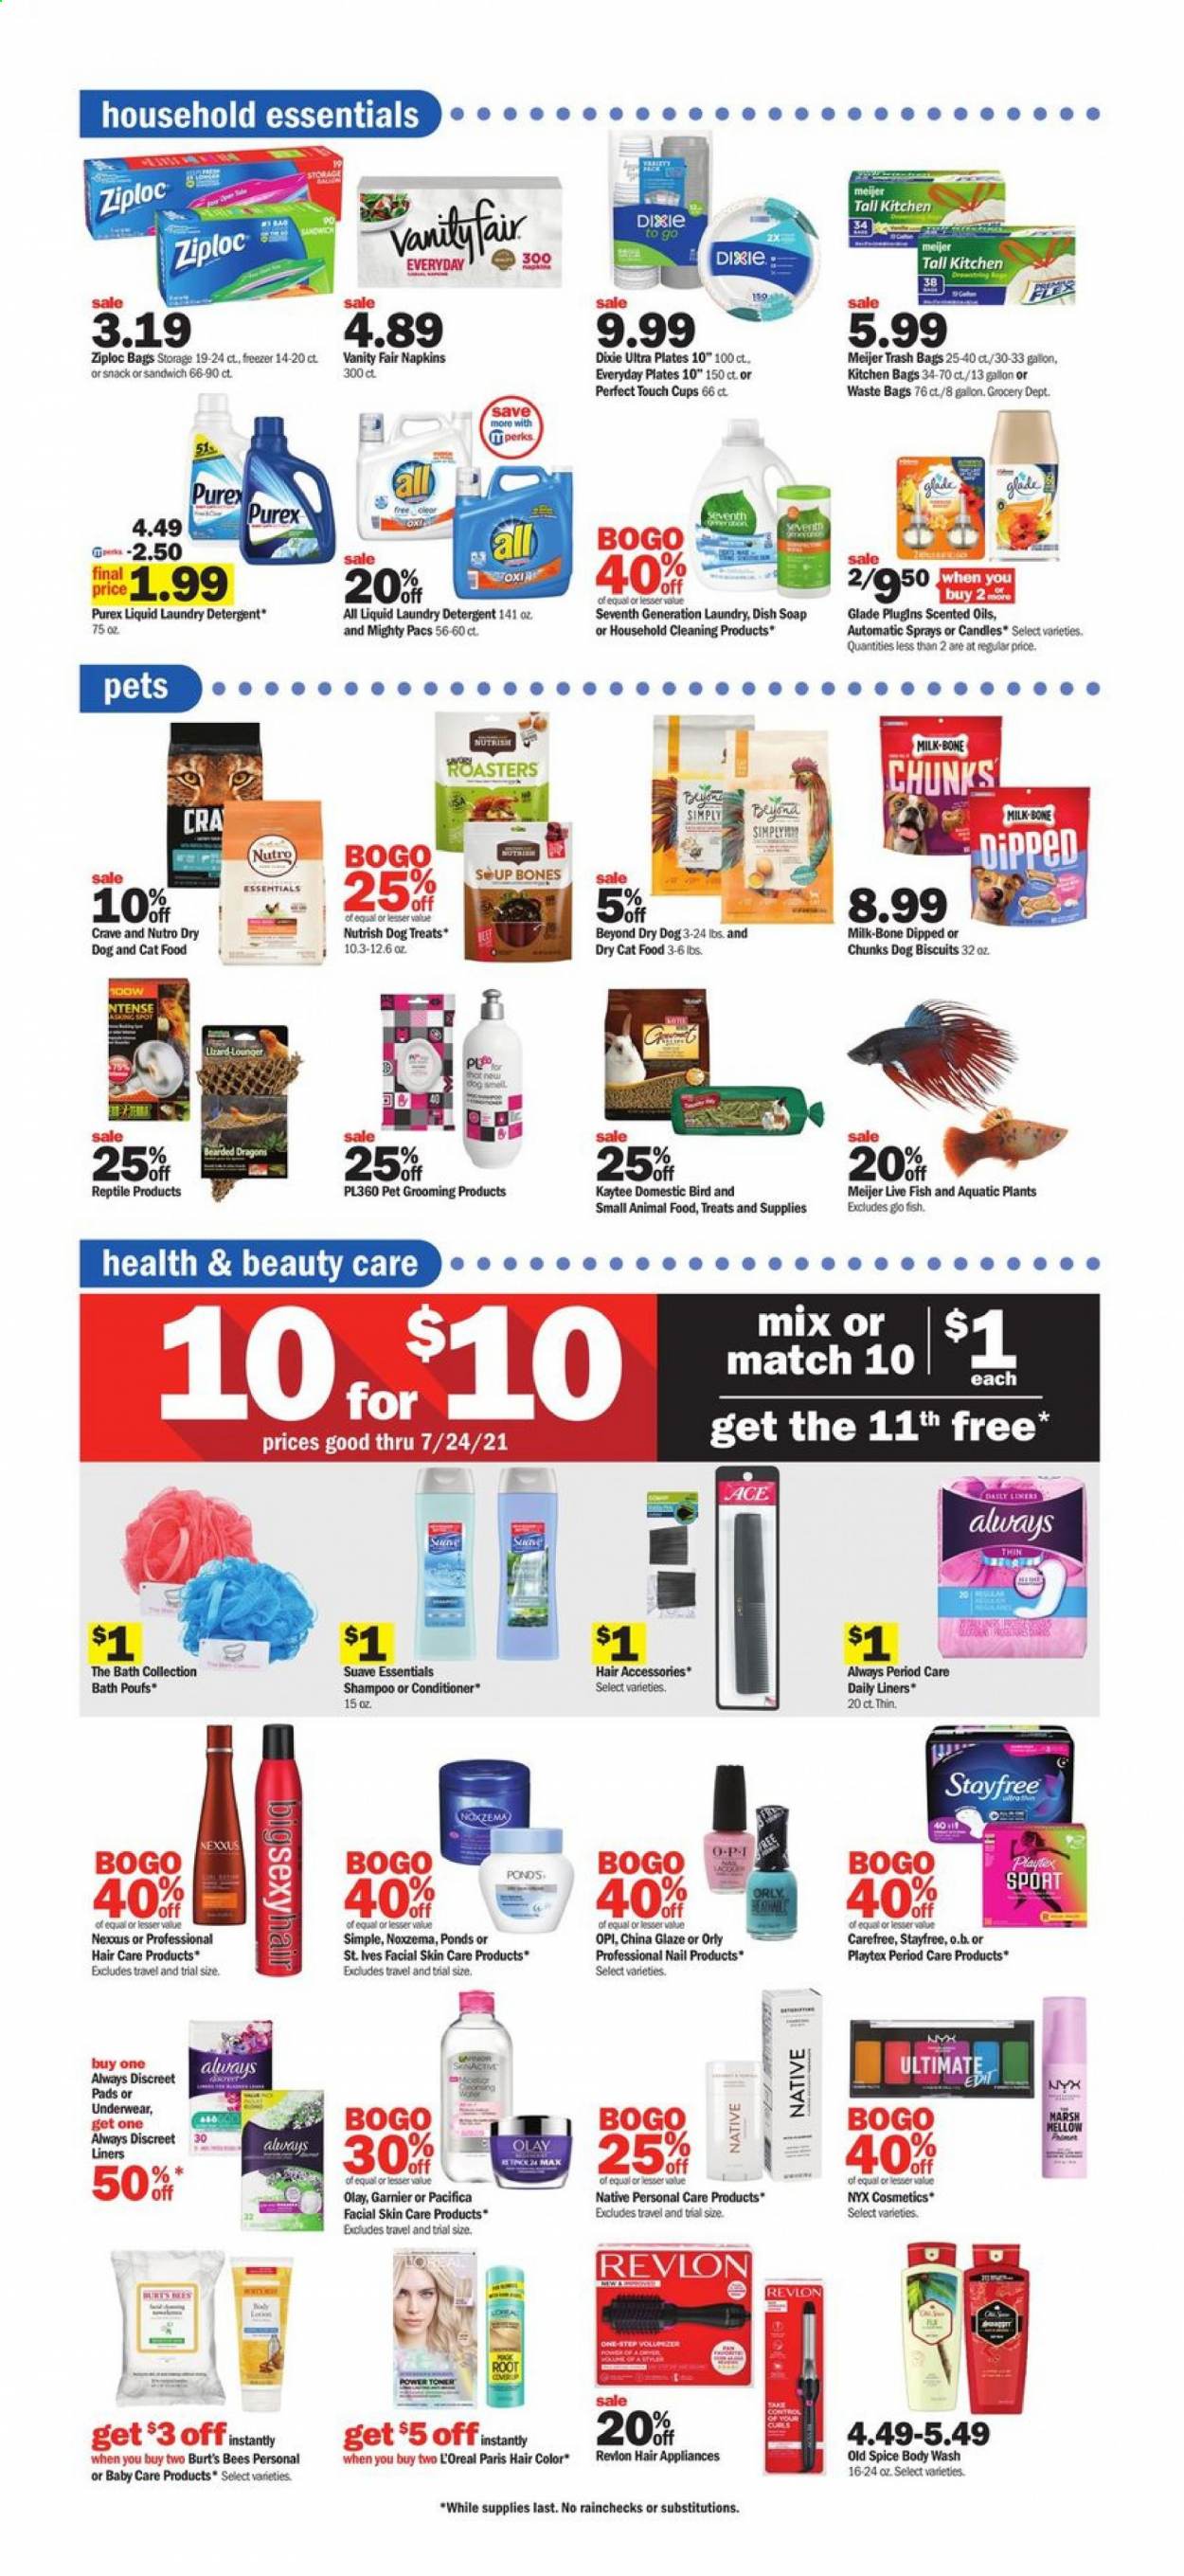 thumbnail - Meijer Flyer - 07/11/2021 - 07/17/2021 - Sales products - sandwich, milk, Ace, spice, napkins, detergent, laundry detergent, Purex, body wash, shampoo, Suave, Old Spice, soap, Stayfree, Playtex, sanitary pads, Always Discreet, Carefree, Garnier, L’Oréal, Olay, NYX Cosmetics, conditioner, Revlon, hair color, Nexxus, Ziploc, trash bags, gallon, plate, cup, candle, Glade, Kaytee, aquarium plant, animal food, animal treats, cat food, dog food, dog biscuits, dry cat food, Nutrish, toner, bag. Page 16.